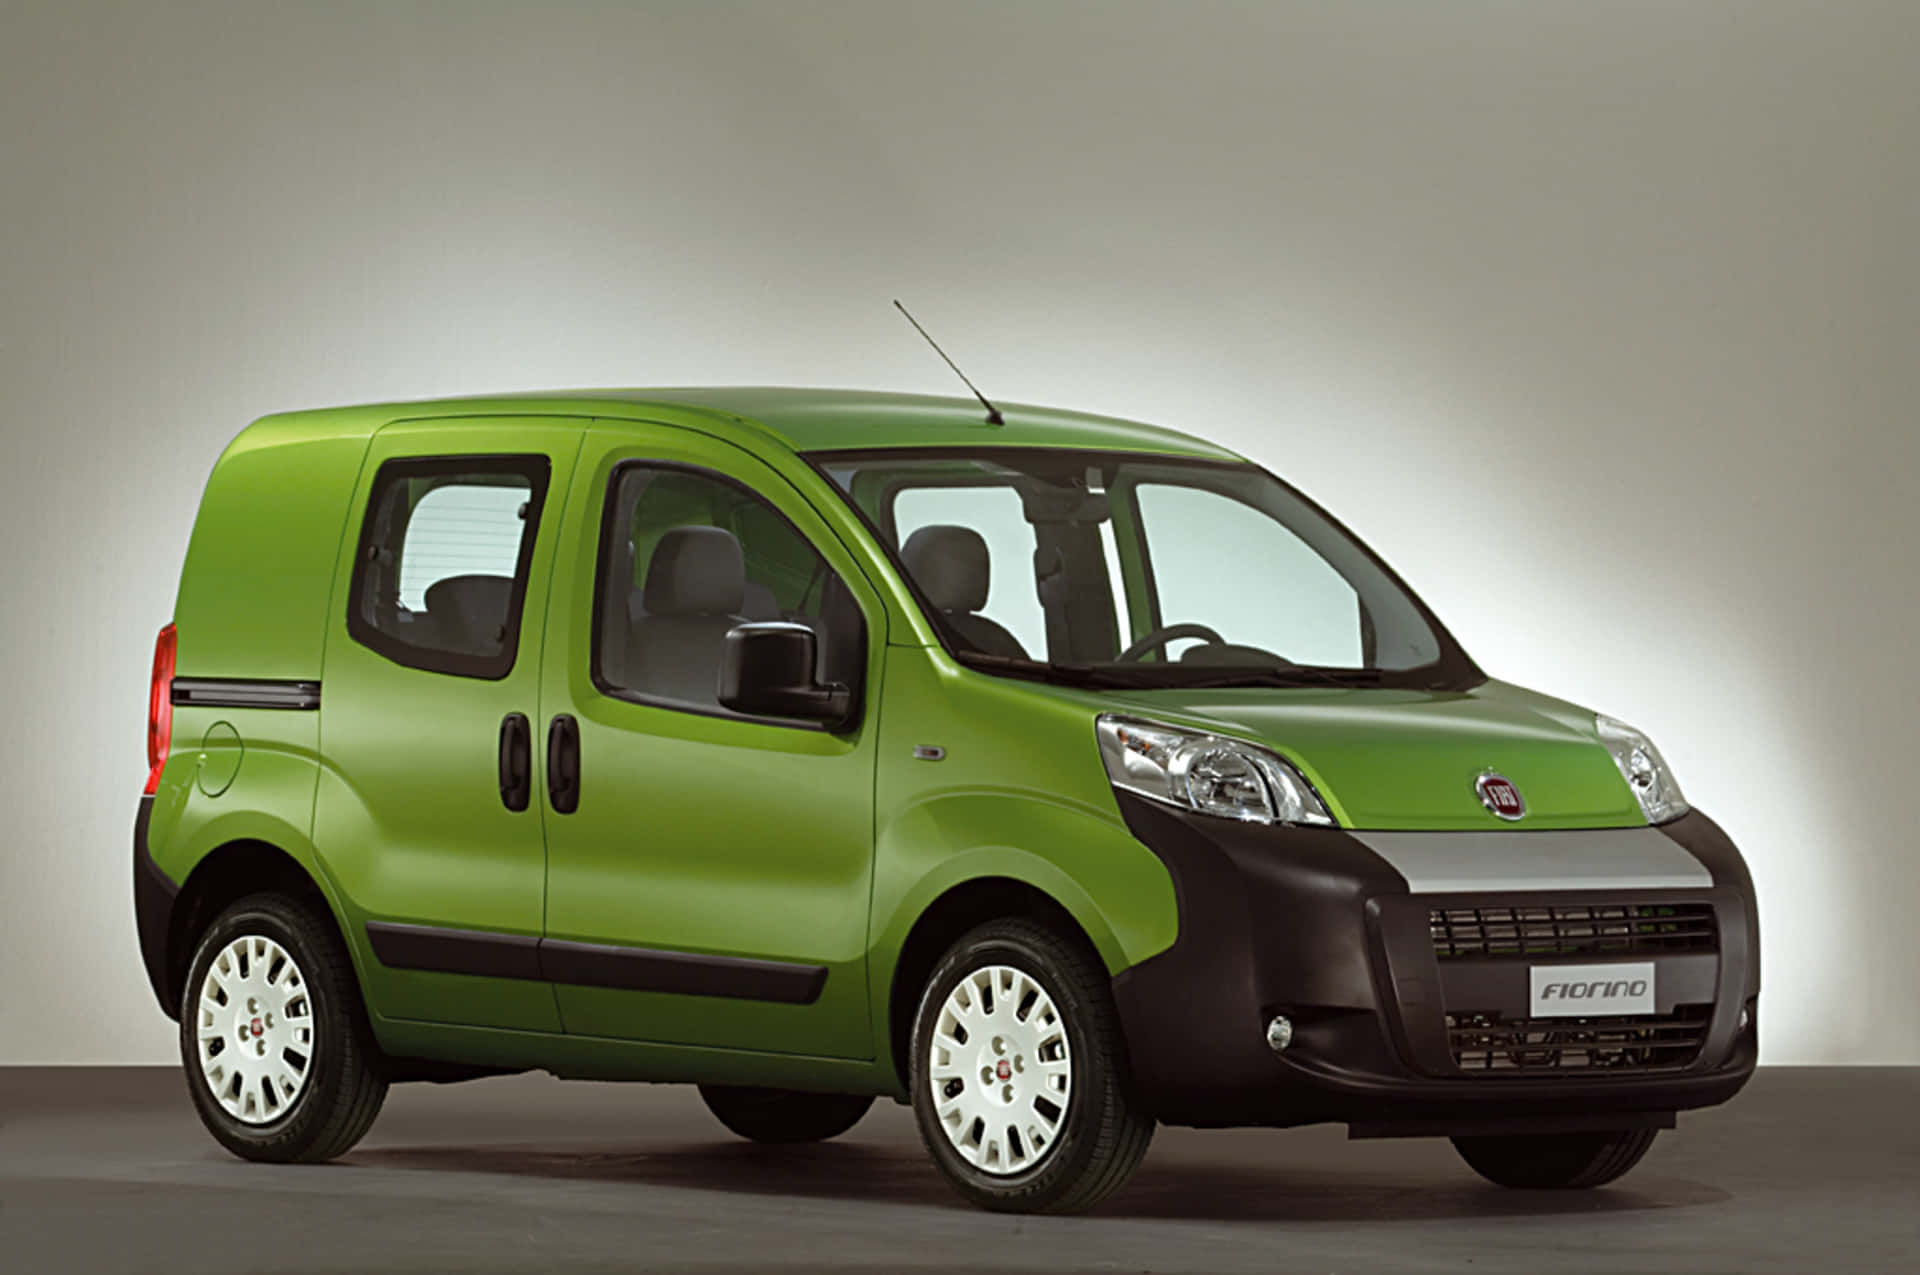 Fiat Fiorino in its Prime: A Durable and Reliable Choice Wallpaper